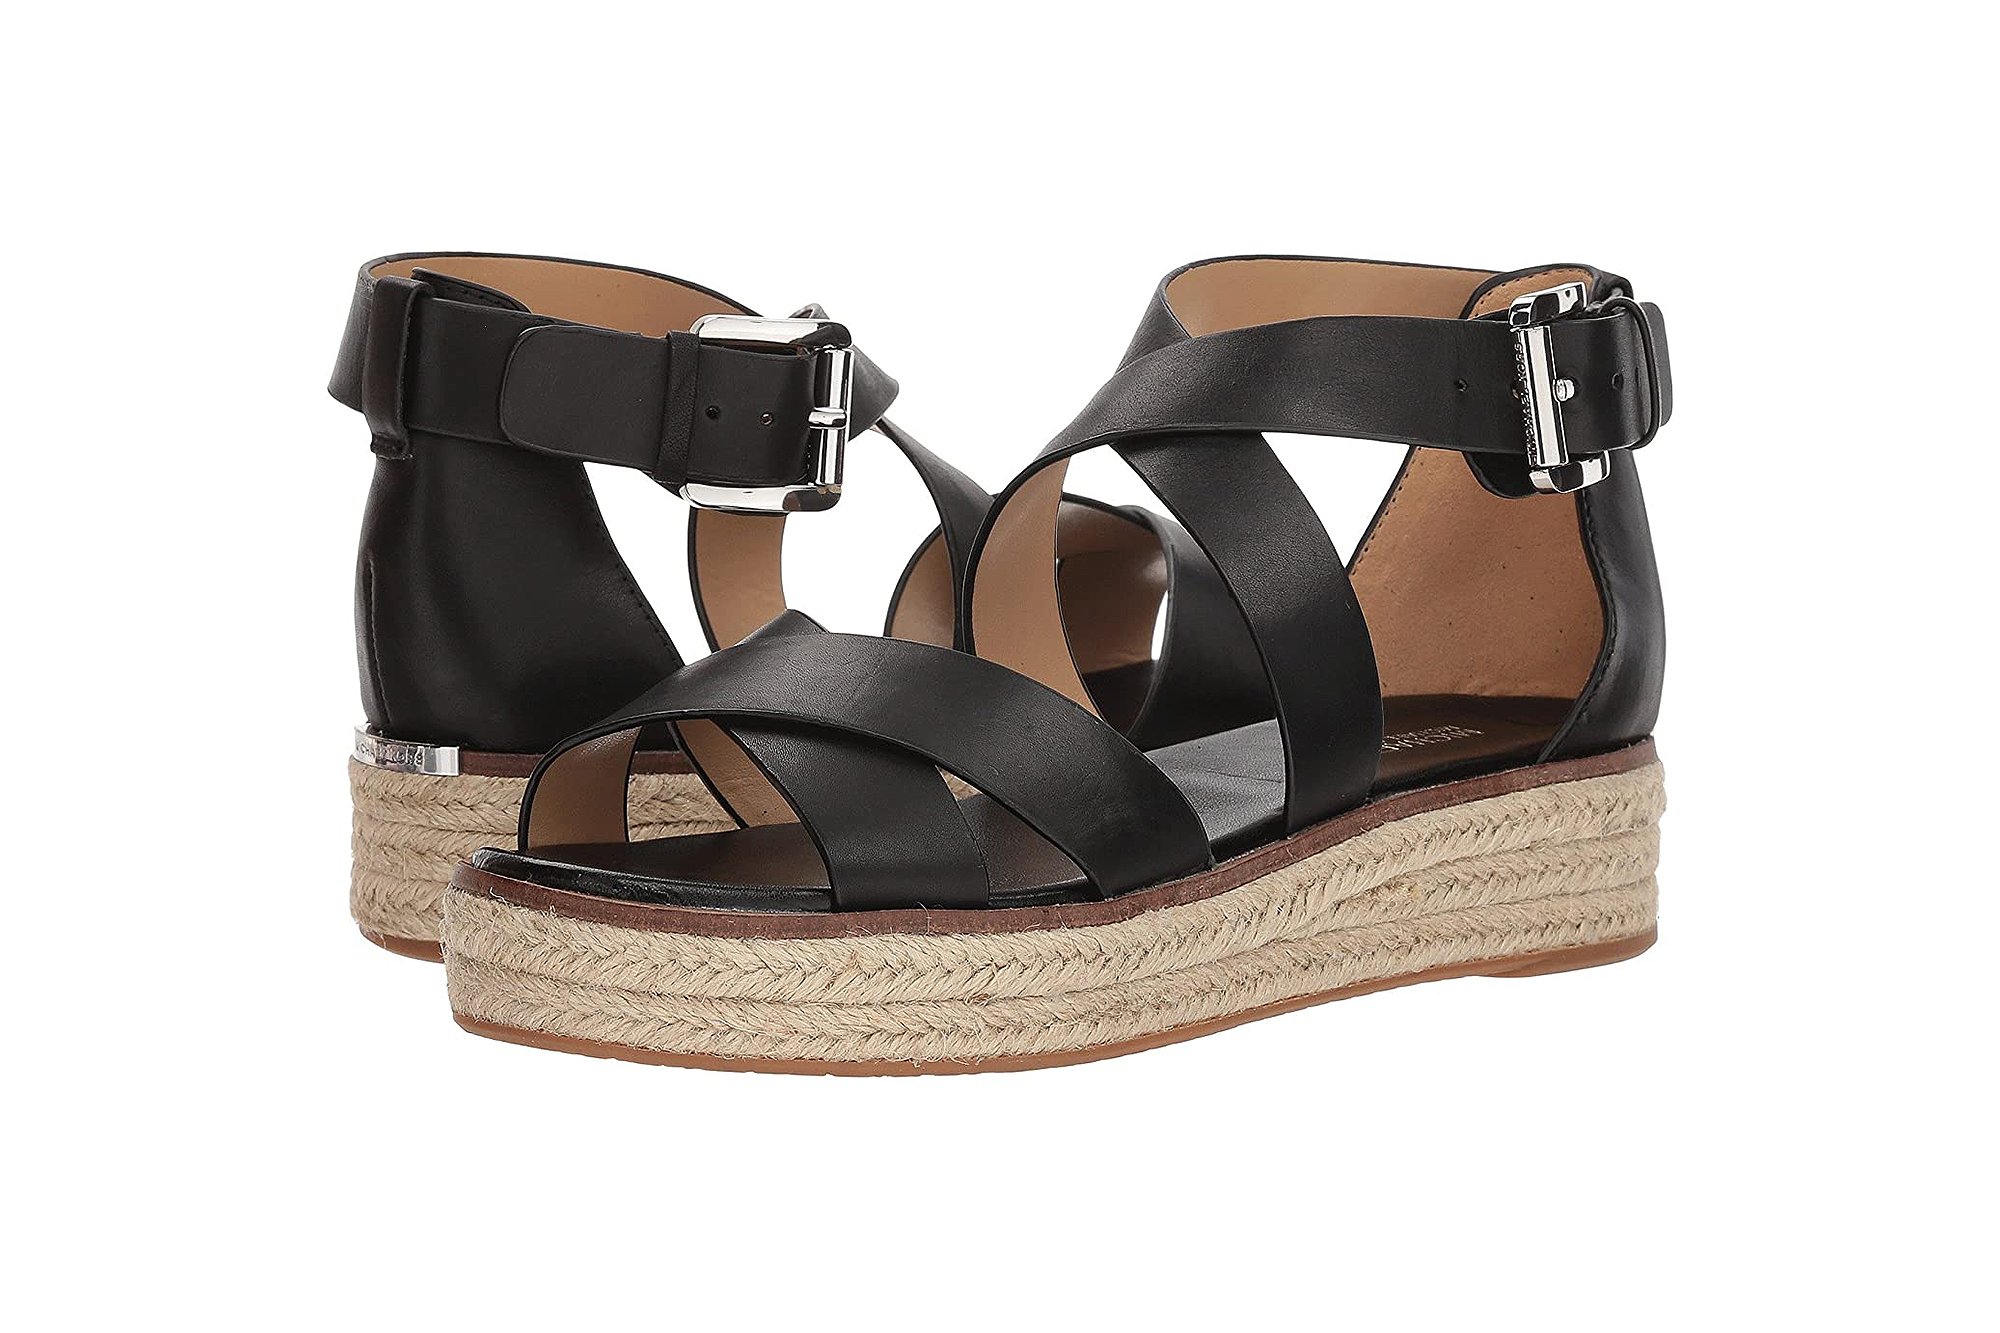 Michael Kors Espadrille Sandals Are Up to 34% Off